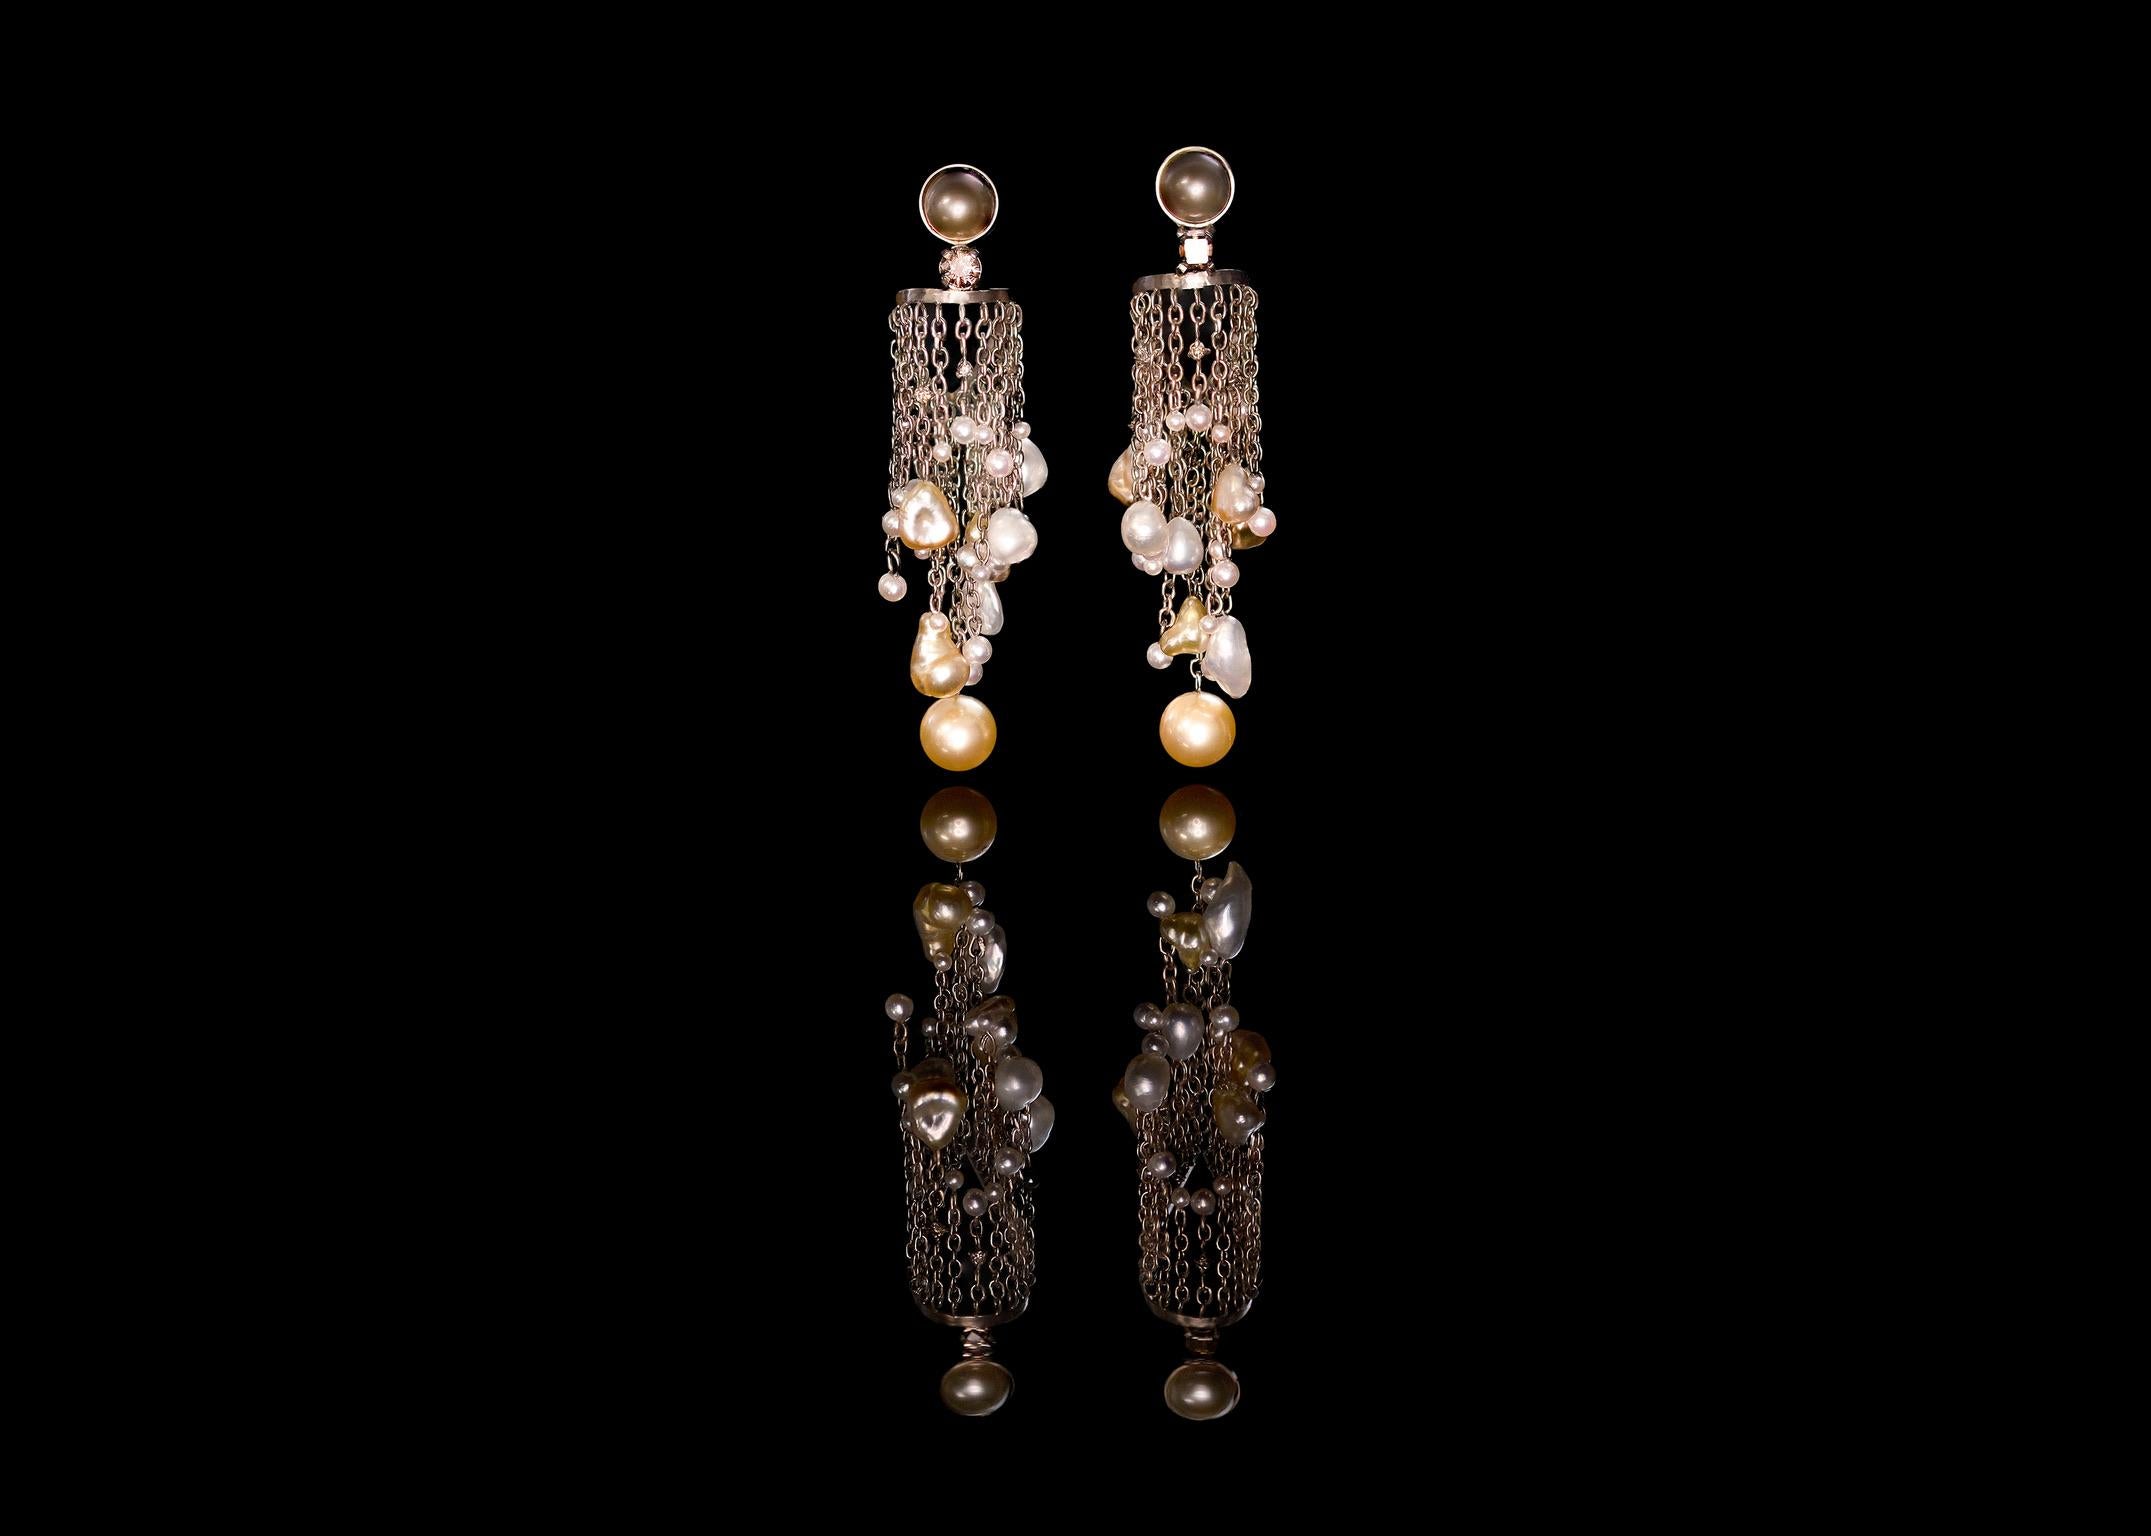 One-of-a-kind Medusa earrings, made of 18K Fairmined white gold, Ocean Diamonds from South Africa, sustainable pearls from the South Sea and traceable Akoya pearls from Vietnam. Every part, including each link of each chain has been completely